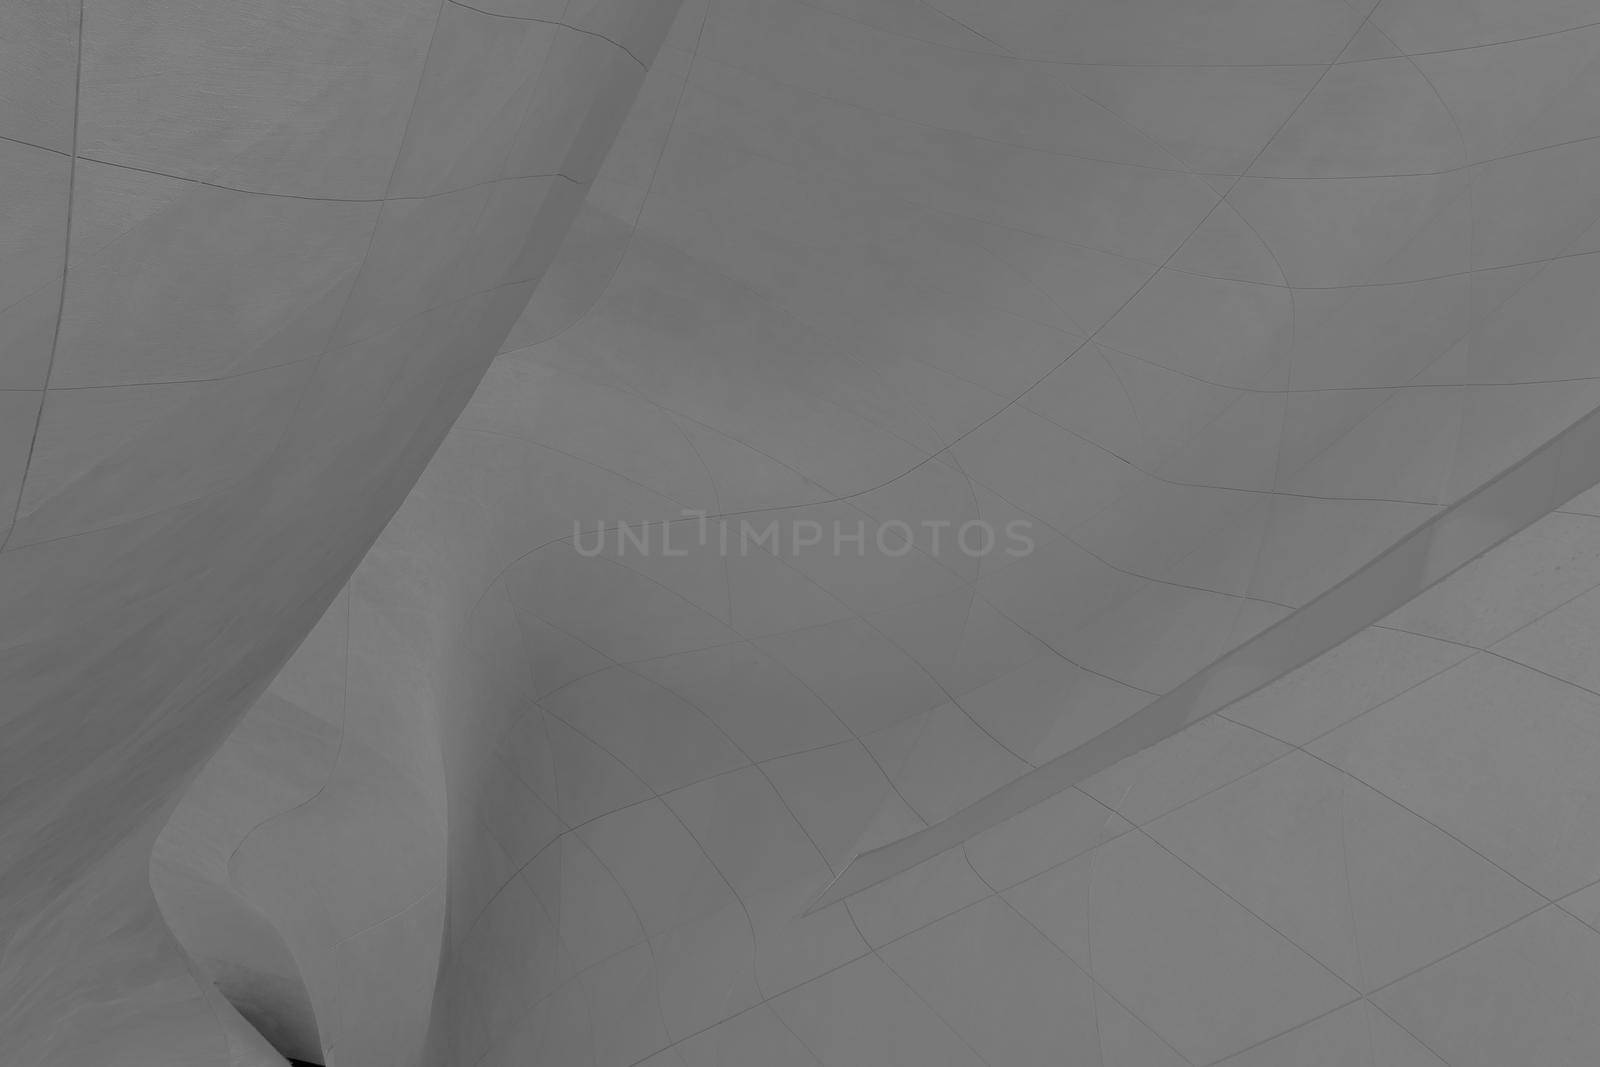 Monochrome refined fragment of contemporary public building, abstract background and interior design concept - Modern architecture details